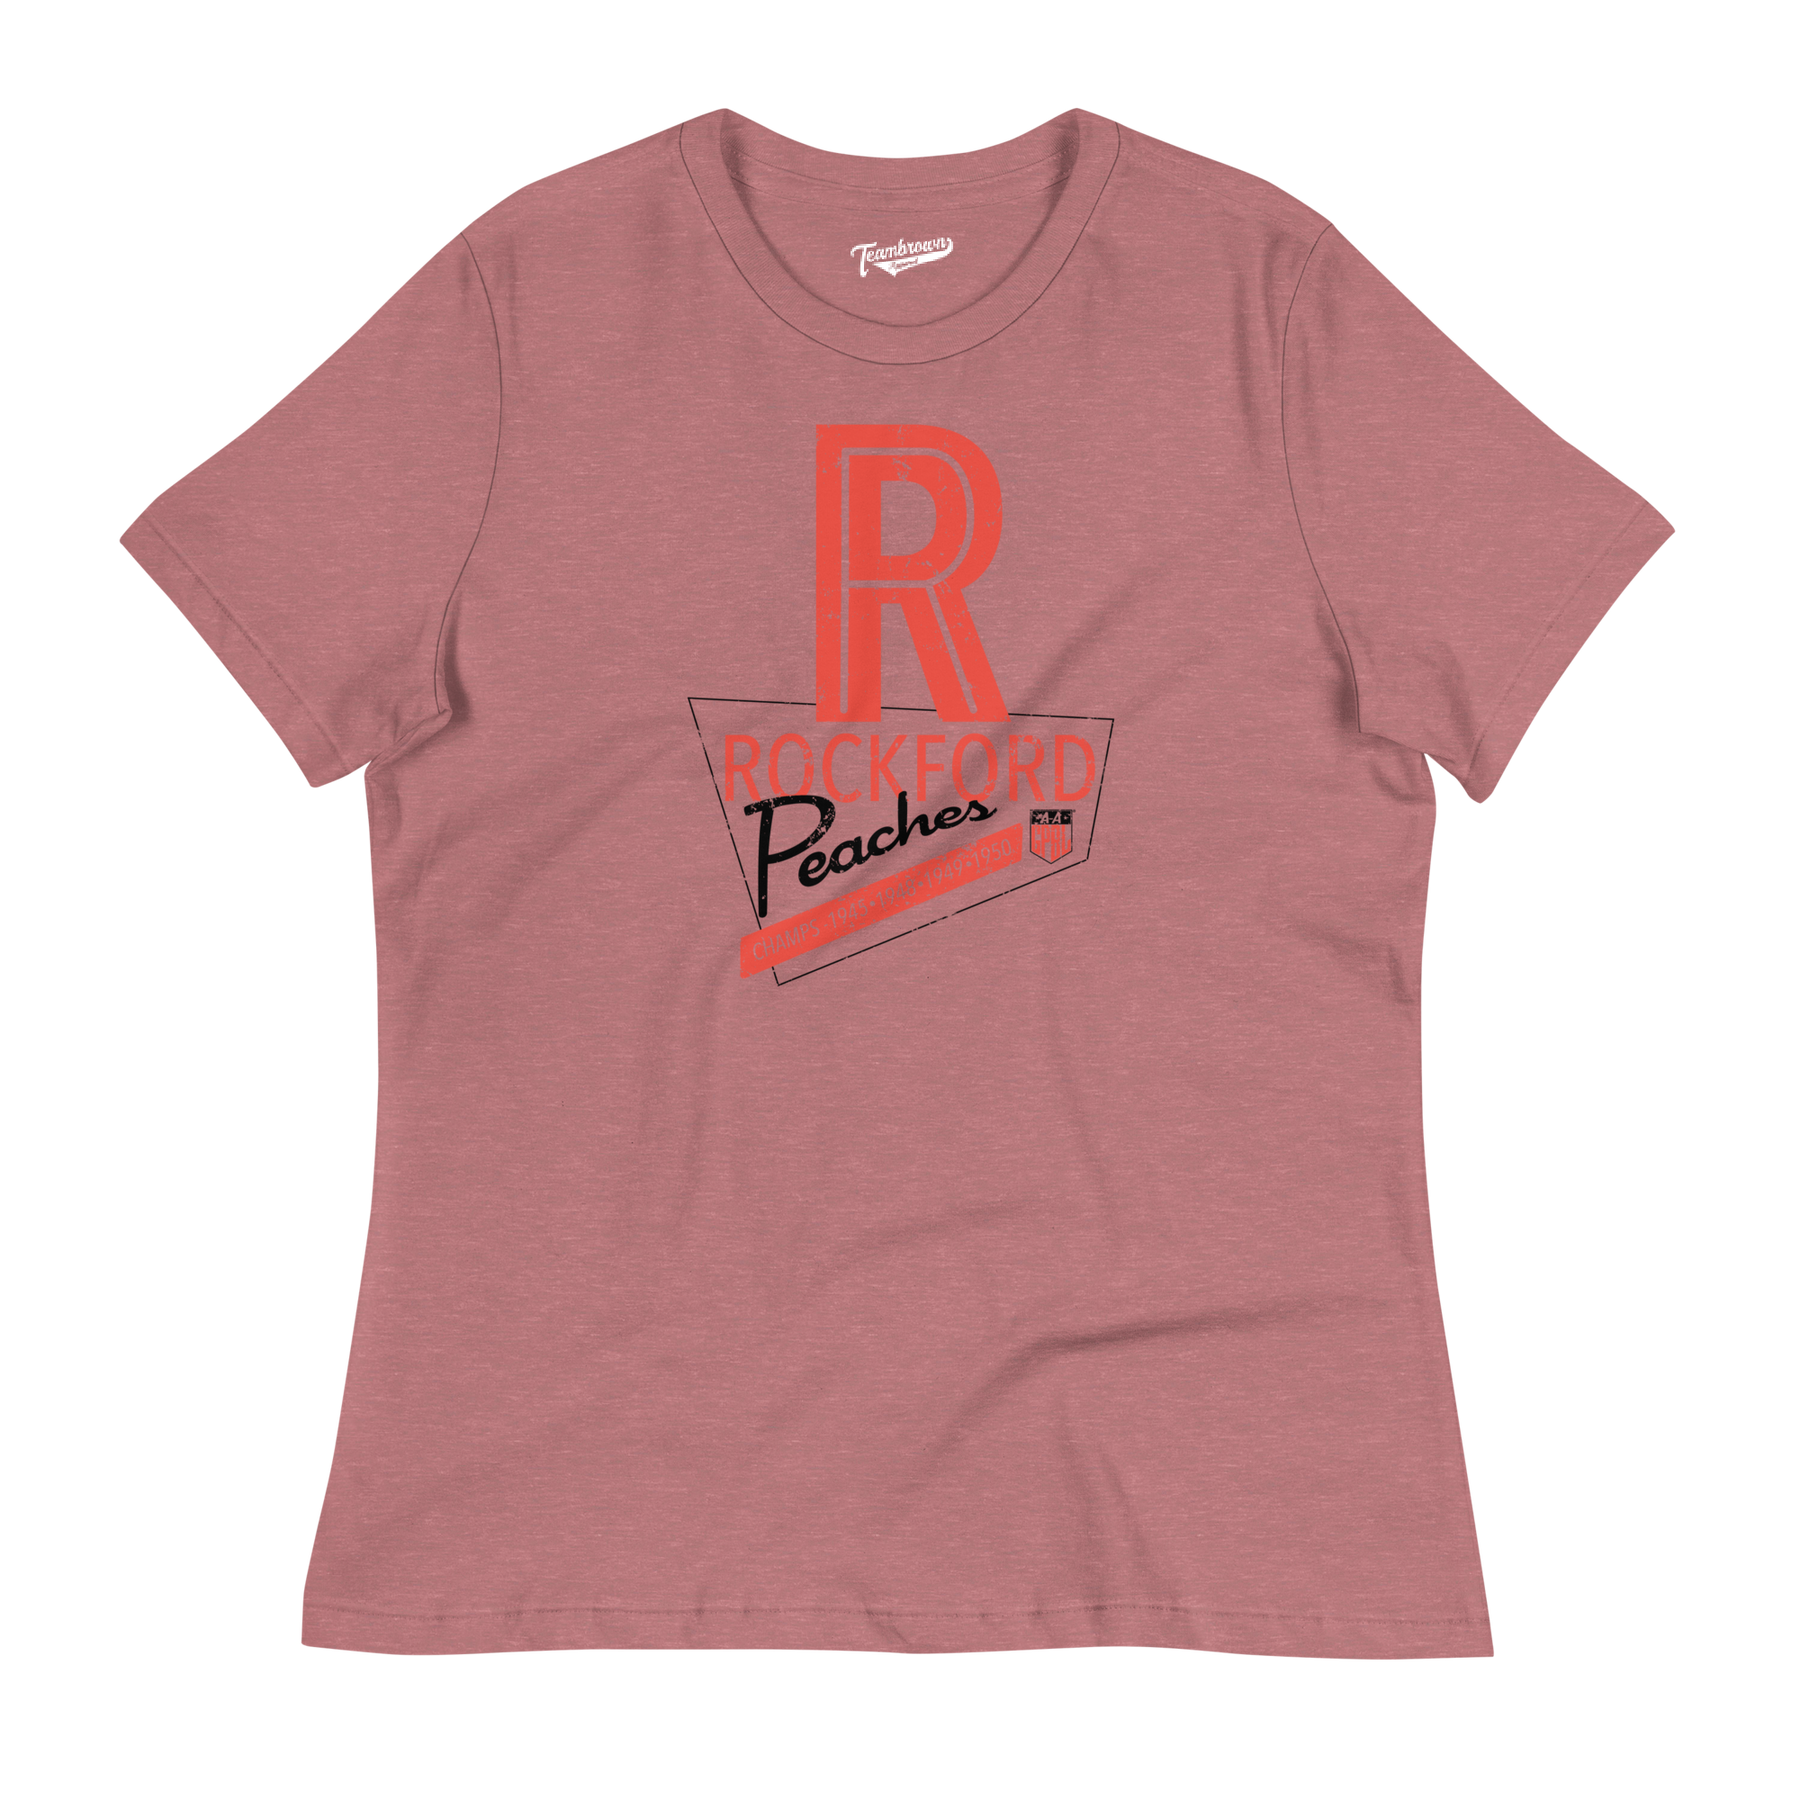 Rockford Peaches Champions - Women's Relaxed Fit T-Shirt | Officially Licensed - AAGPBL